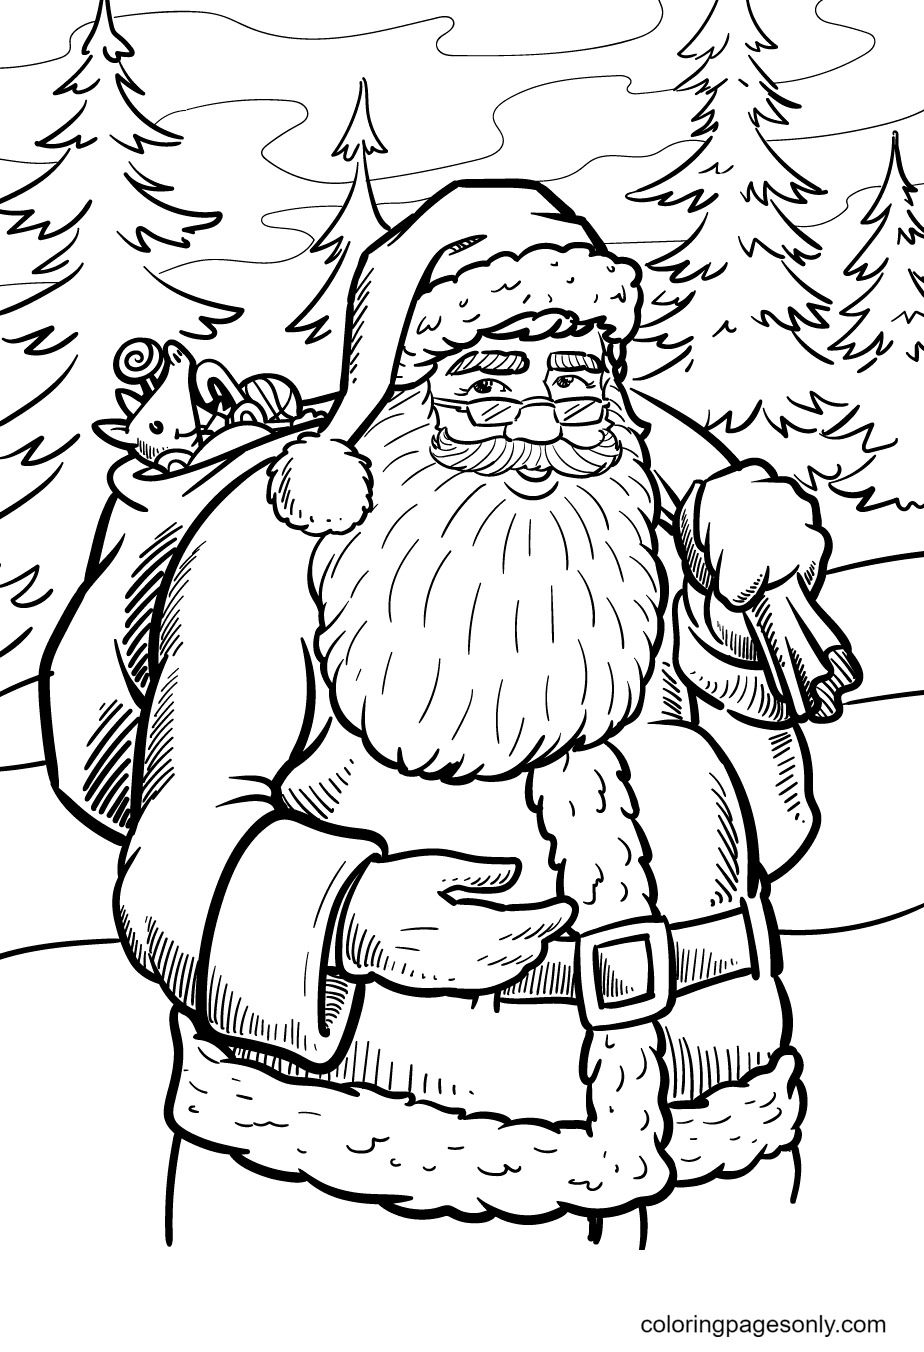 Santa Claus with Pine Trees Coloring Page